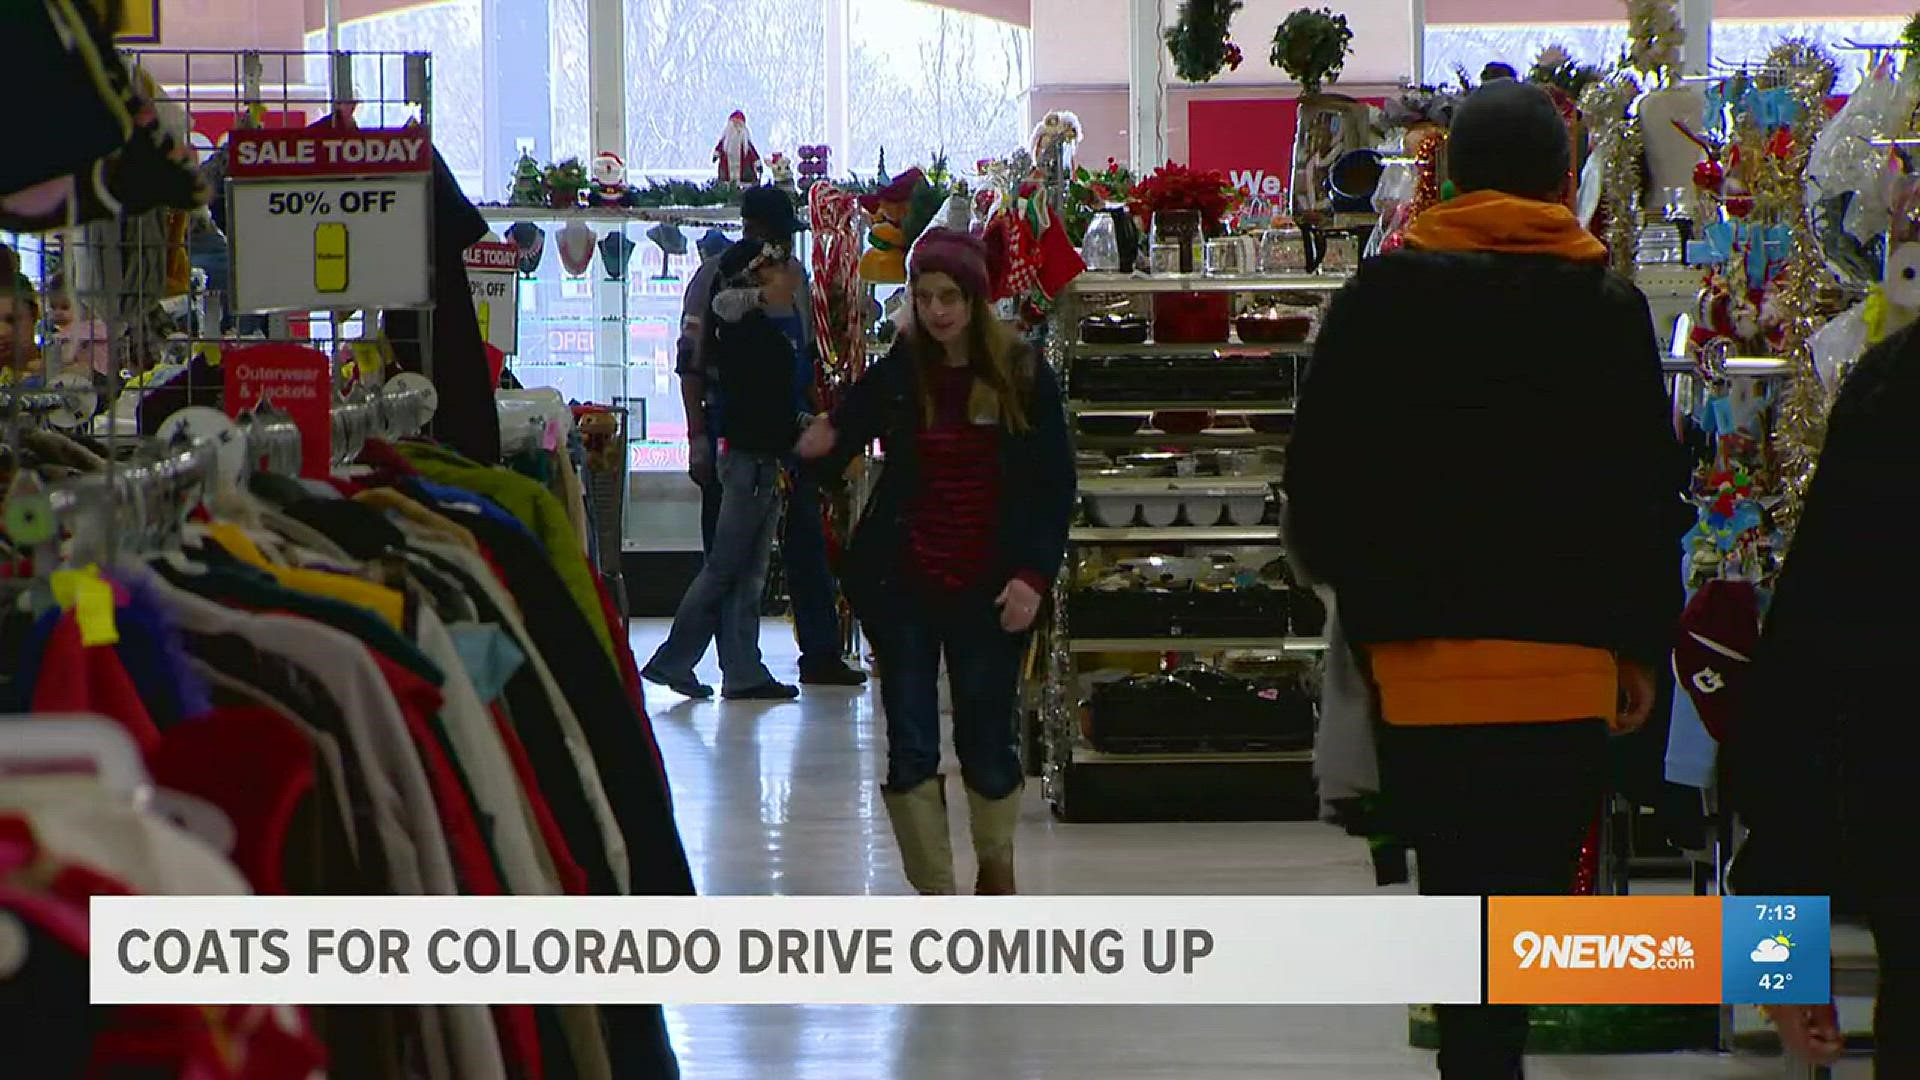 Dependable Cleaners president Steve Foltz talks with 9NEWS about the Coats for Colorado charity drive.